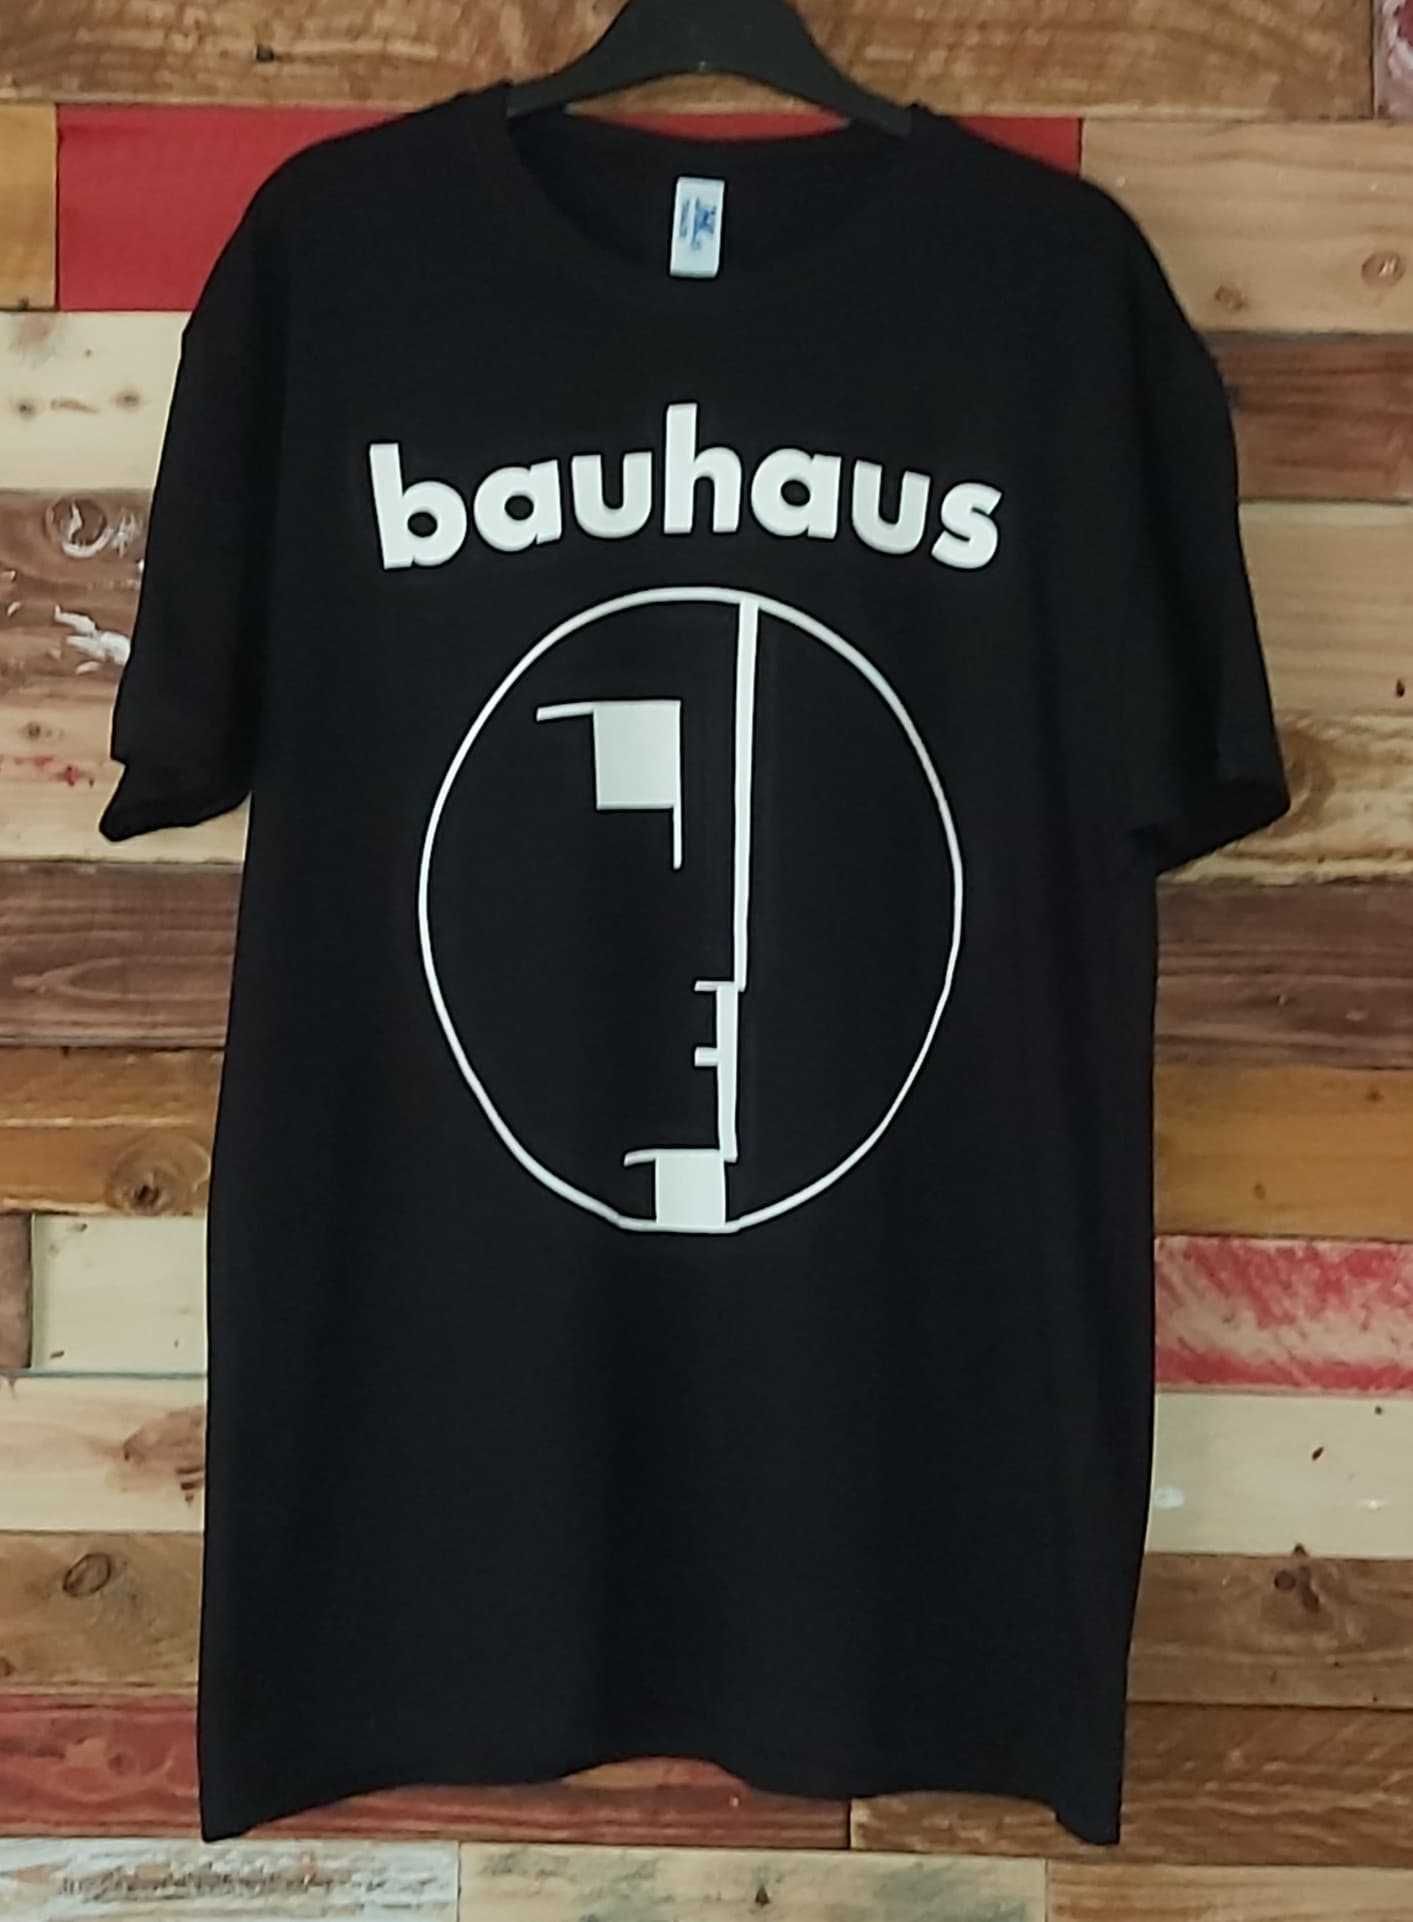 Bauhaus / Sisters Of Mercy / The Mission / The Cult / Siouxie -T-shirt